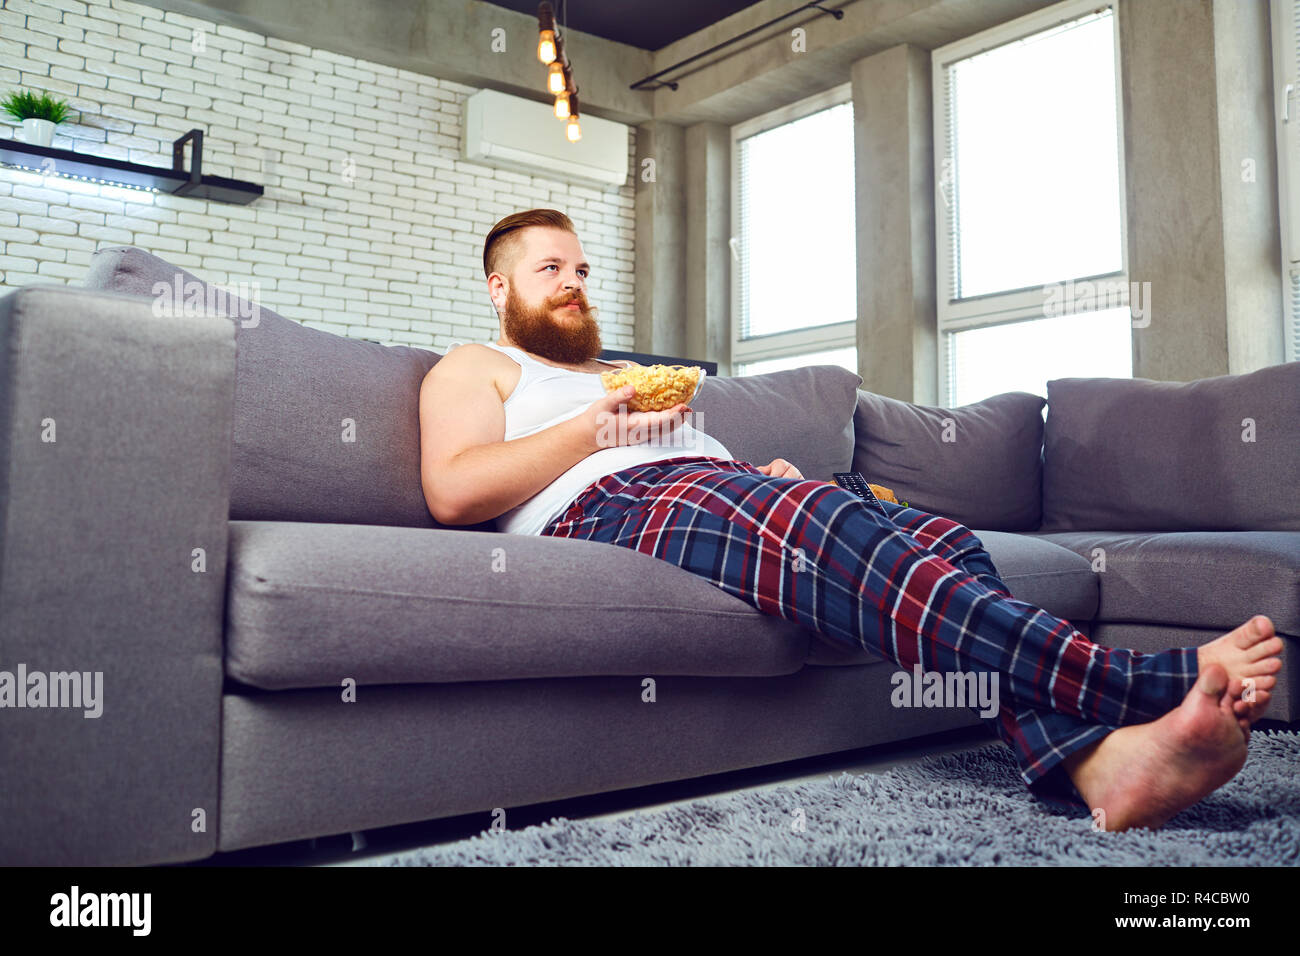 Thick bearded man eating popcor sitting on the couch. Stock Photo